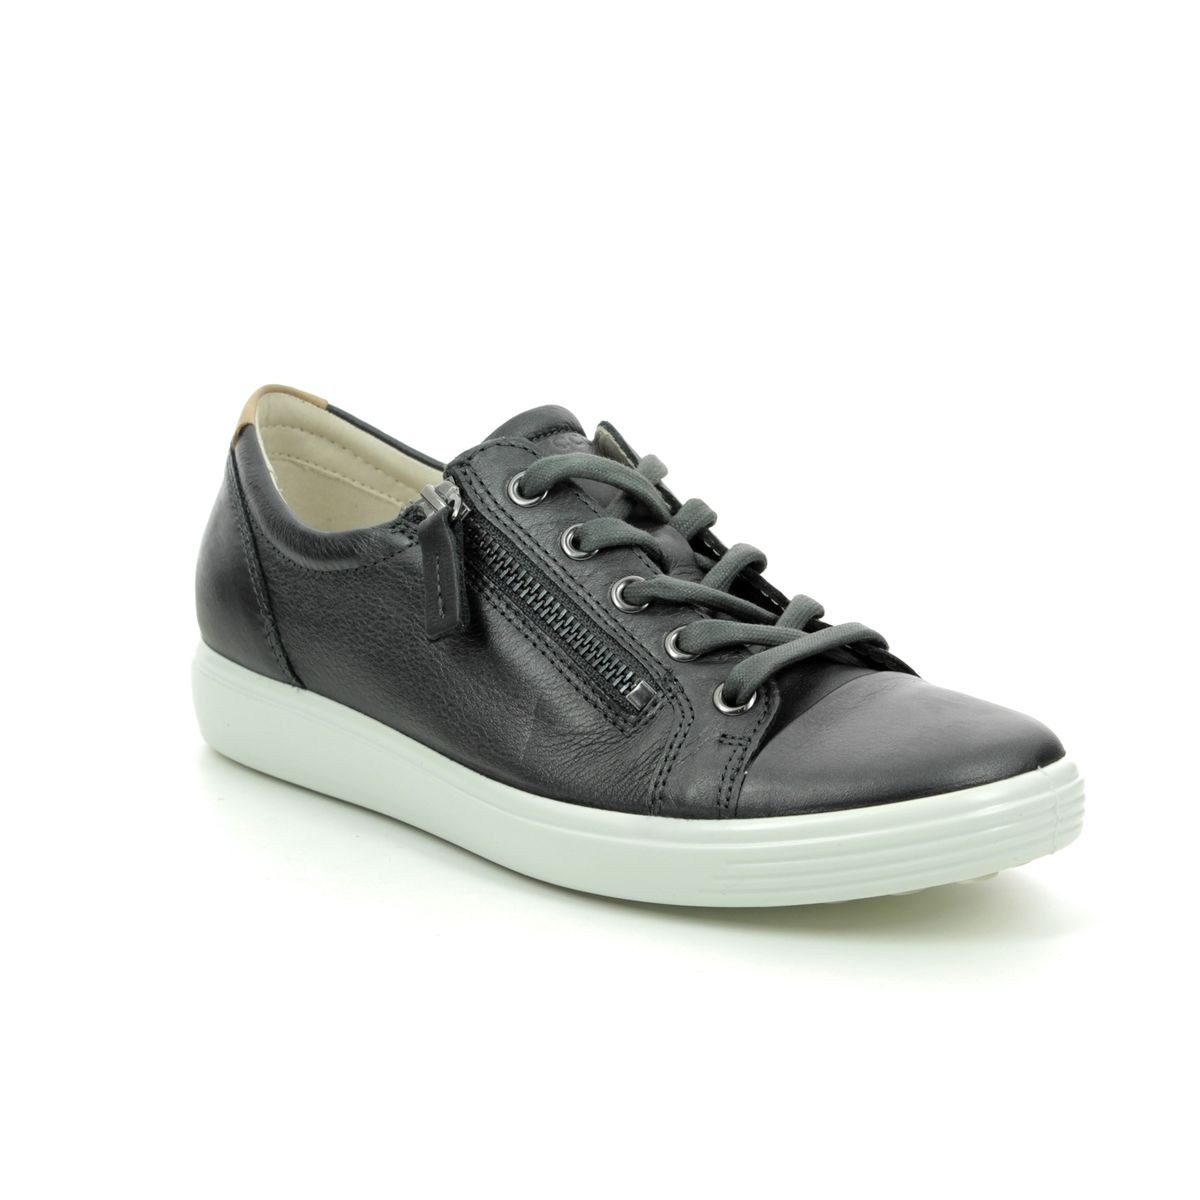 Ecco Soft 7 Lace Zip Dark Grey Leather Womens Lacing Shoes 430853-51383 In Size 41 In Plain Dark Grey Leather